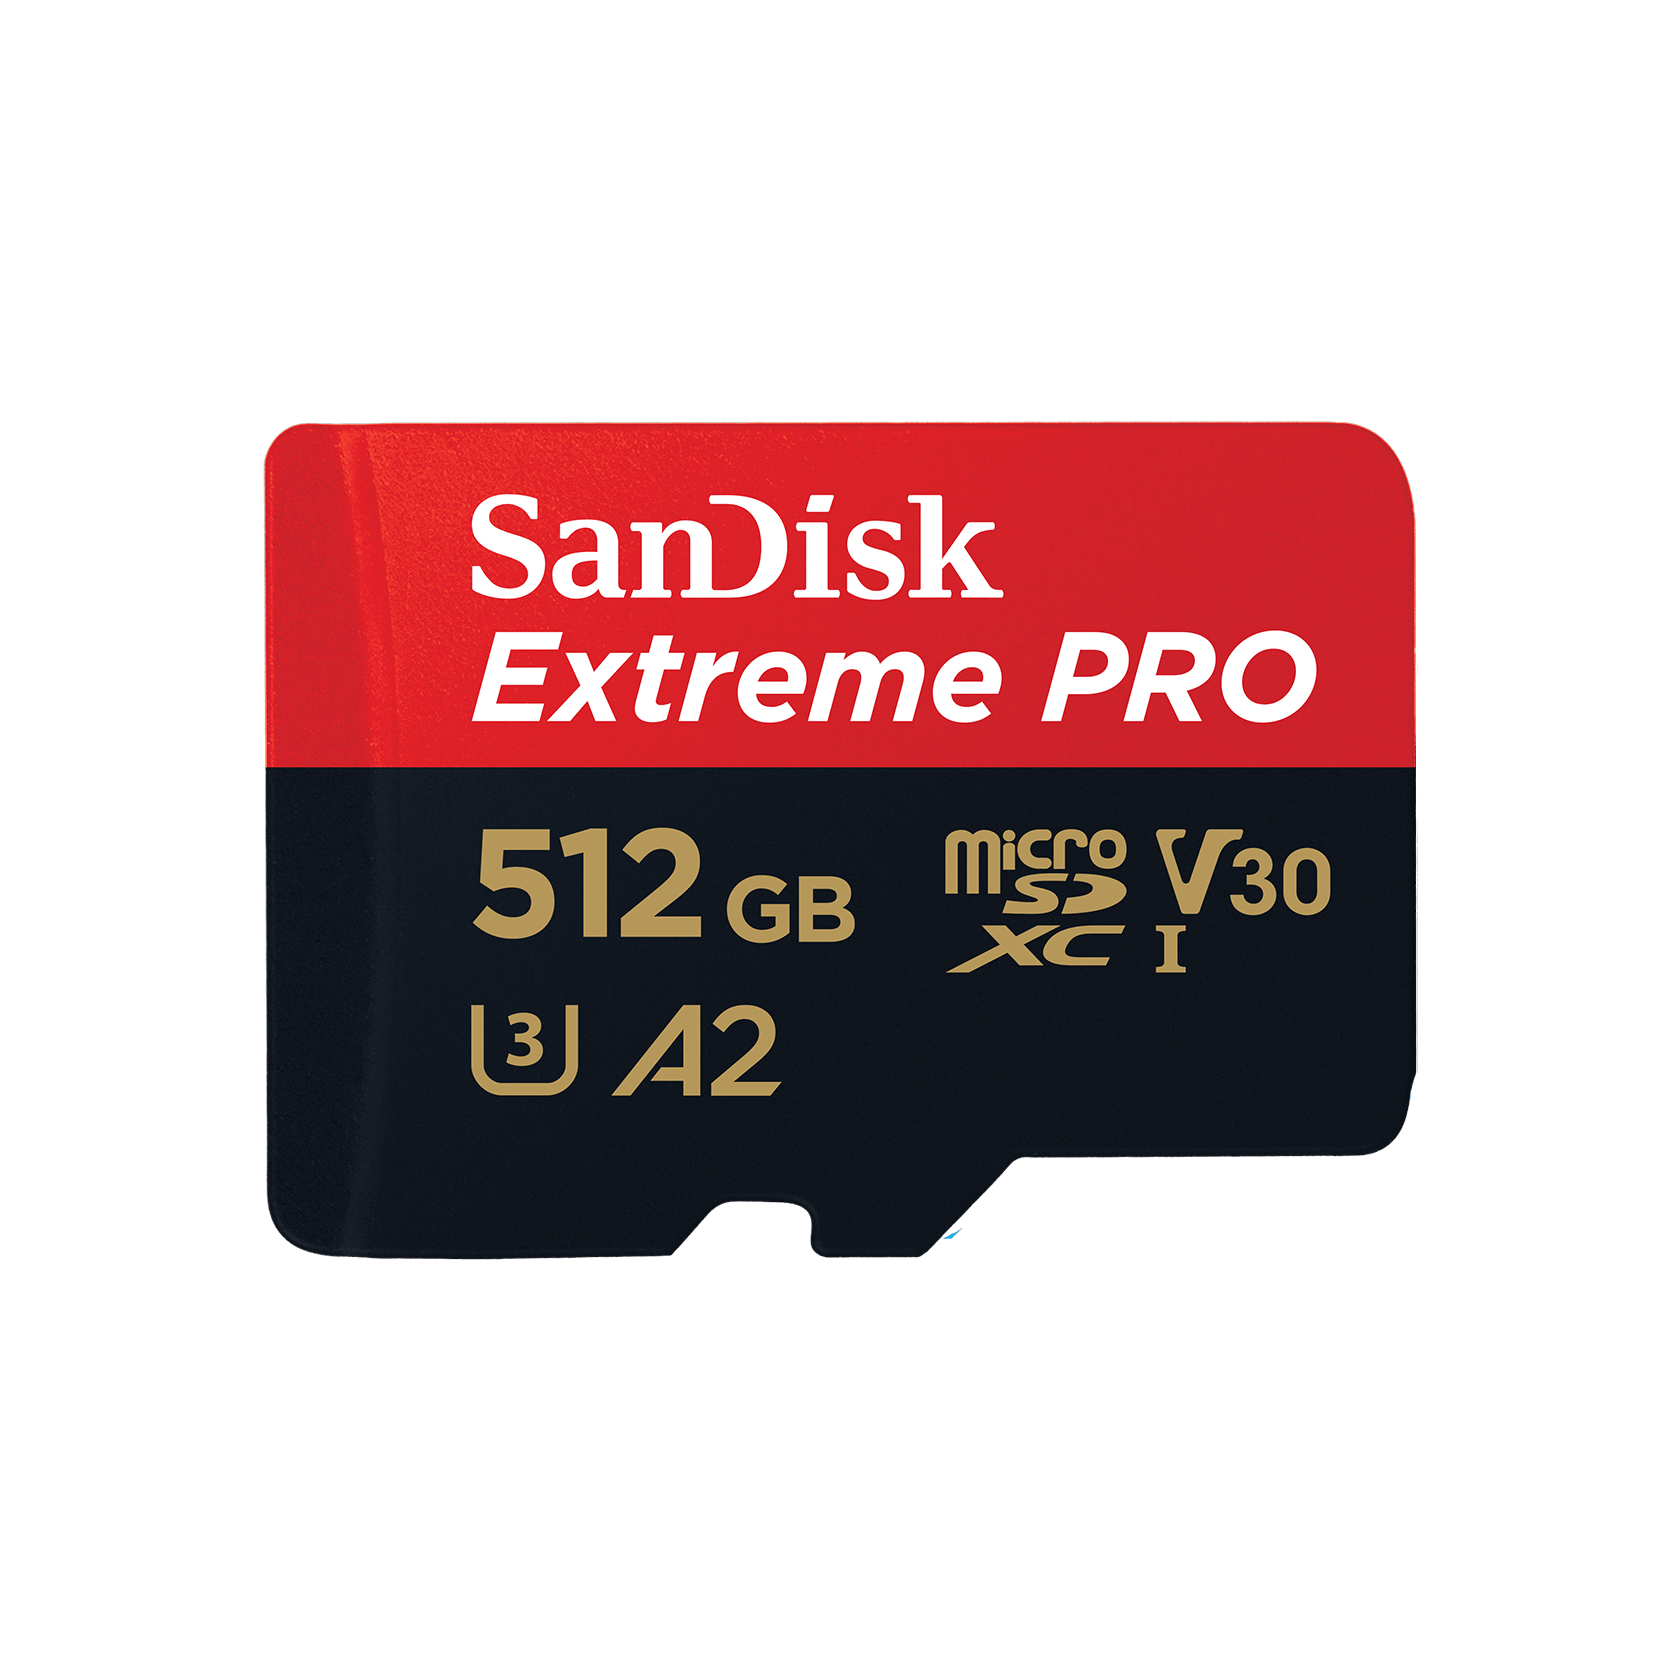 SanDisk Extreme PRO UHS-I Card - 512GB - SDSQXCD-512G-GN6MA